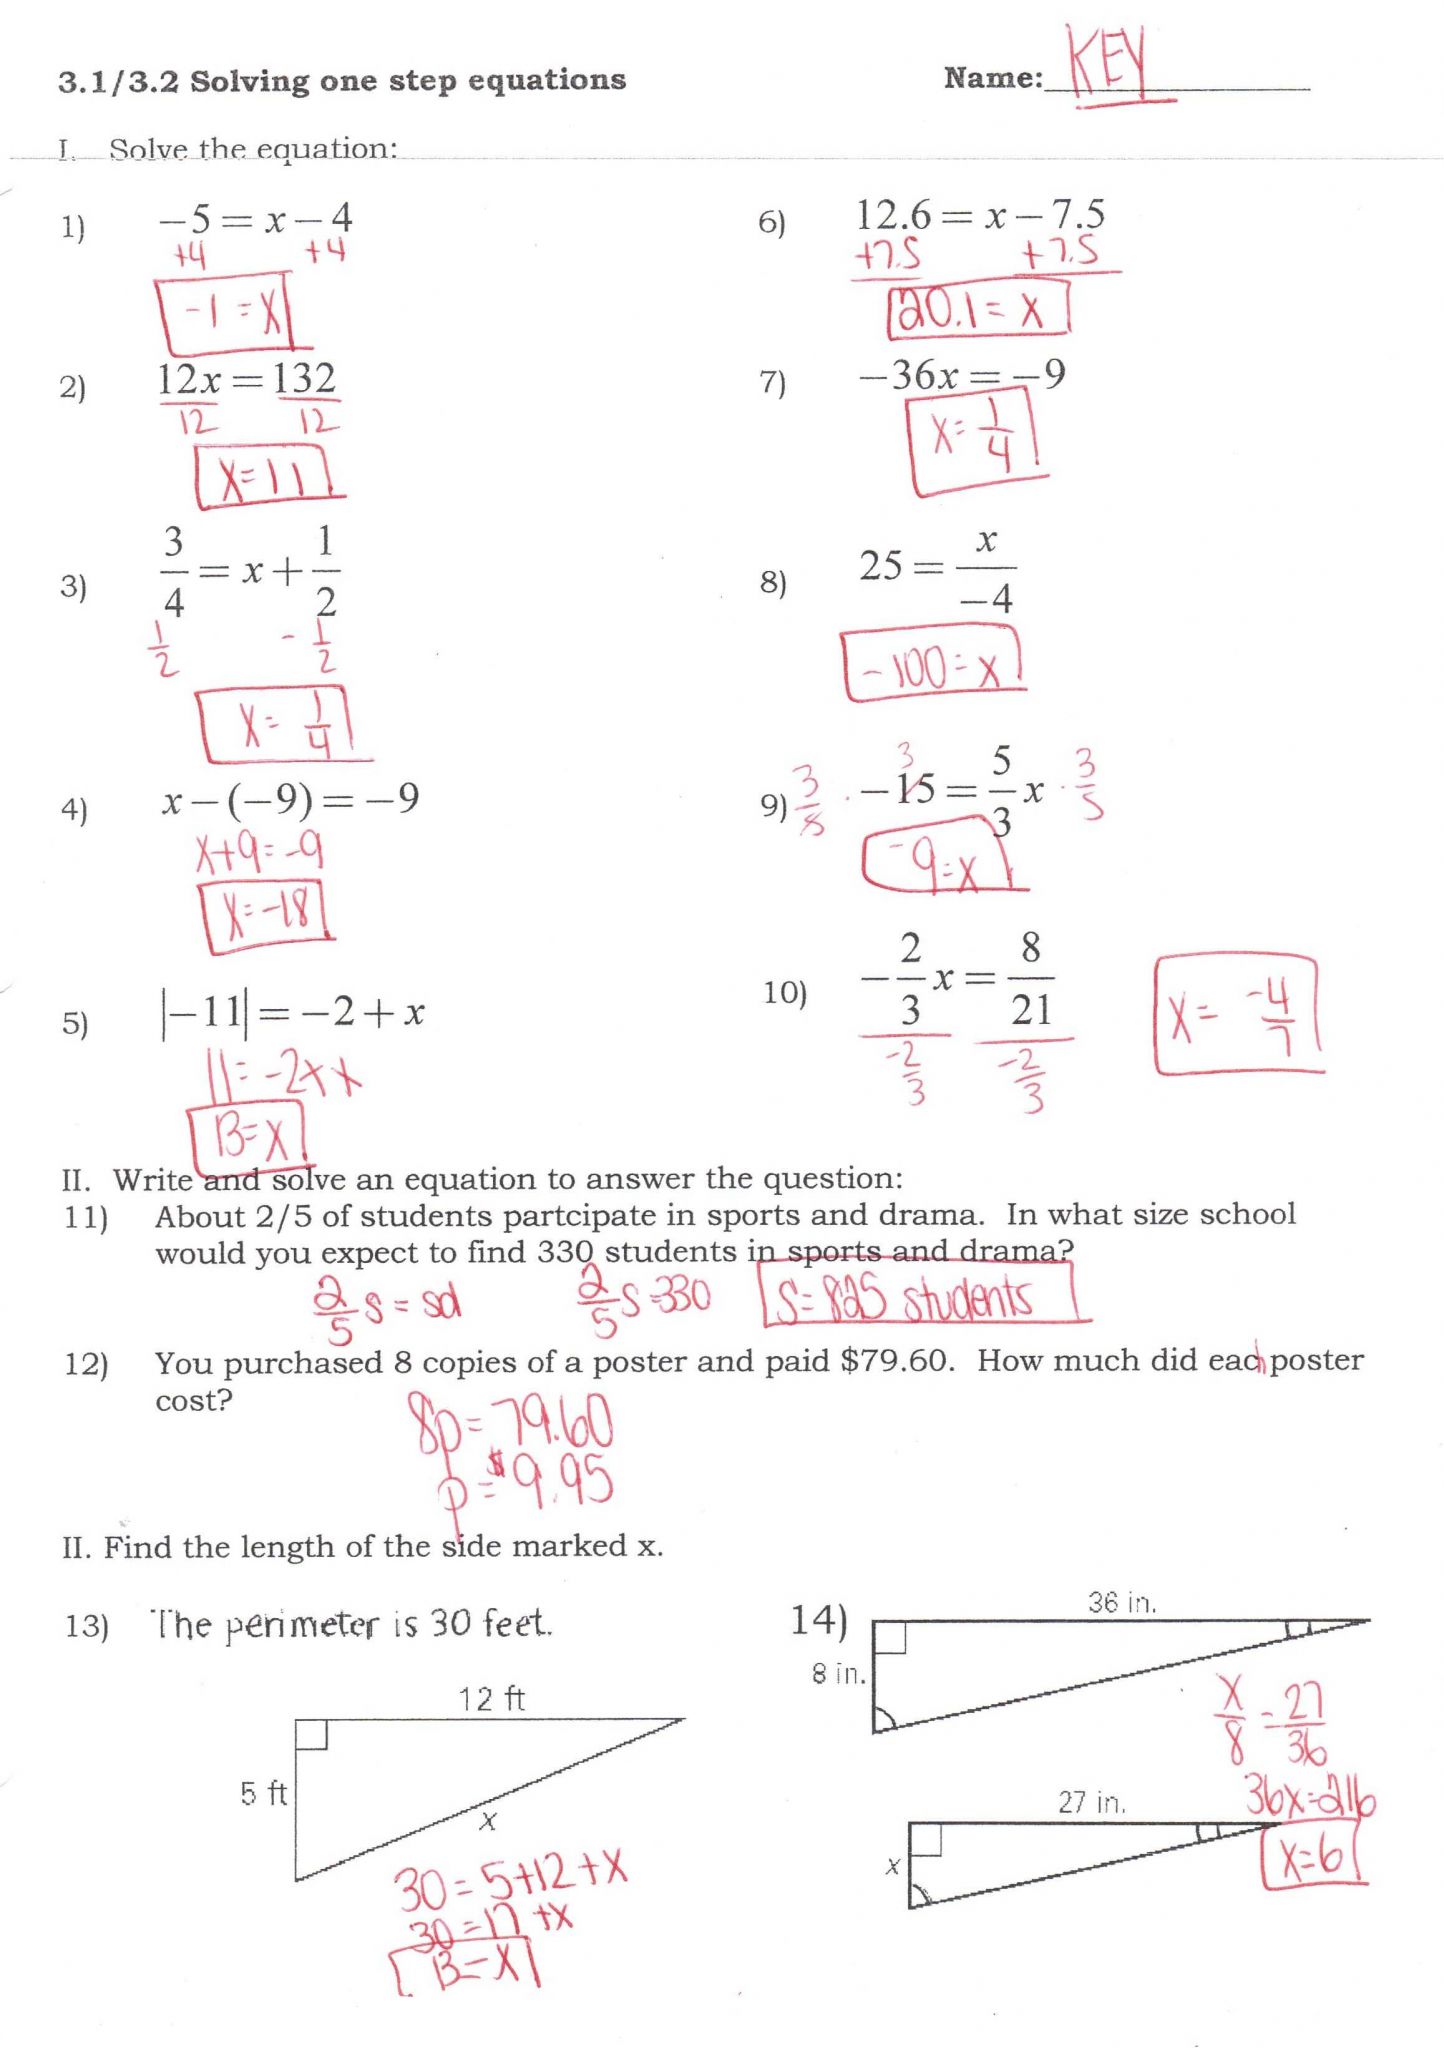 Characteristics Of Quadratic Functions Worksheet Answers Along with Graphing Quadratic Functions Worksheet Answer Key Unique Pre Algebra